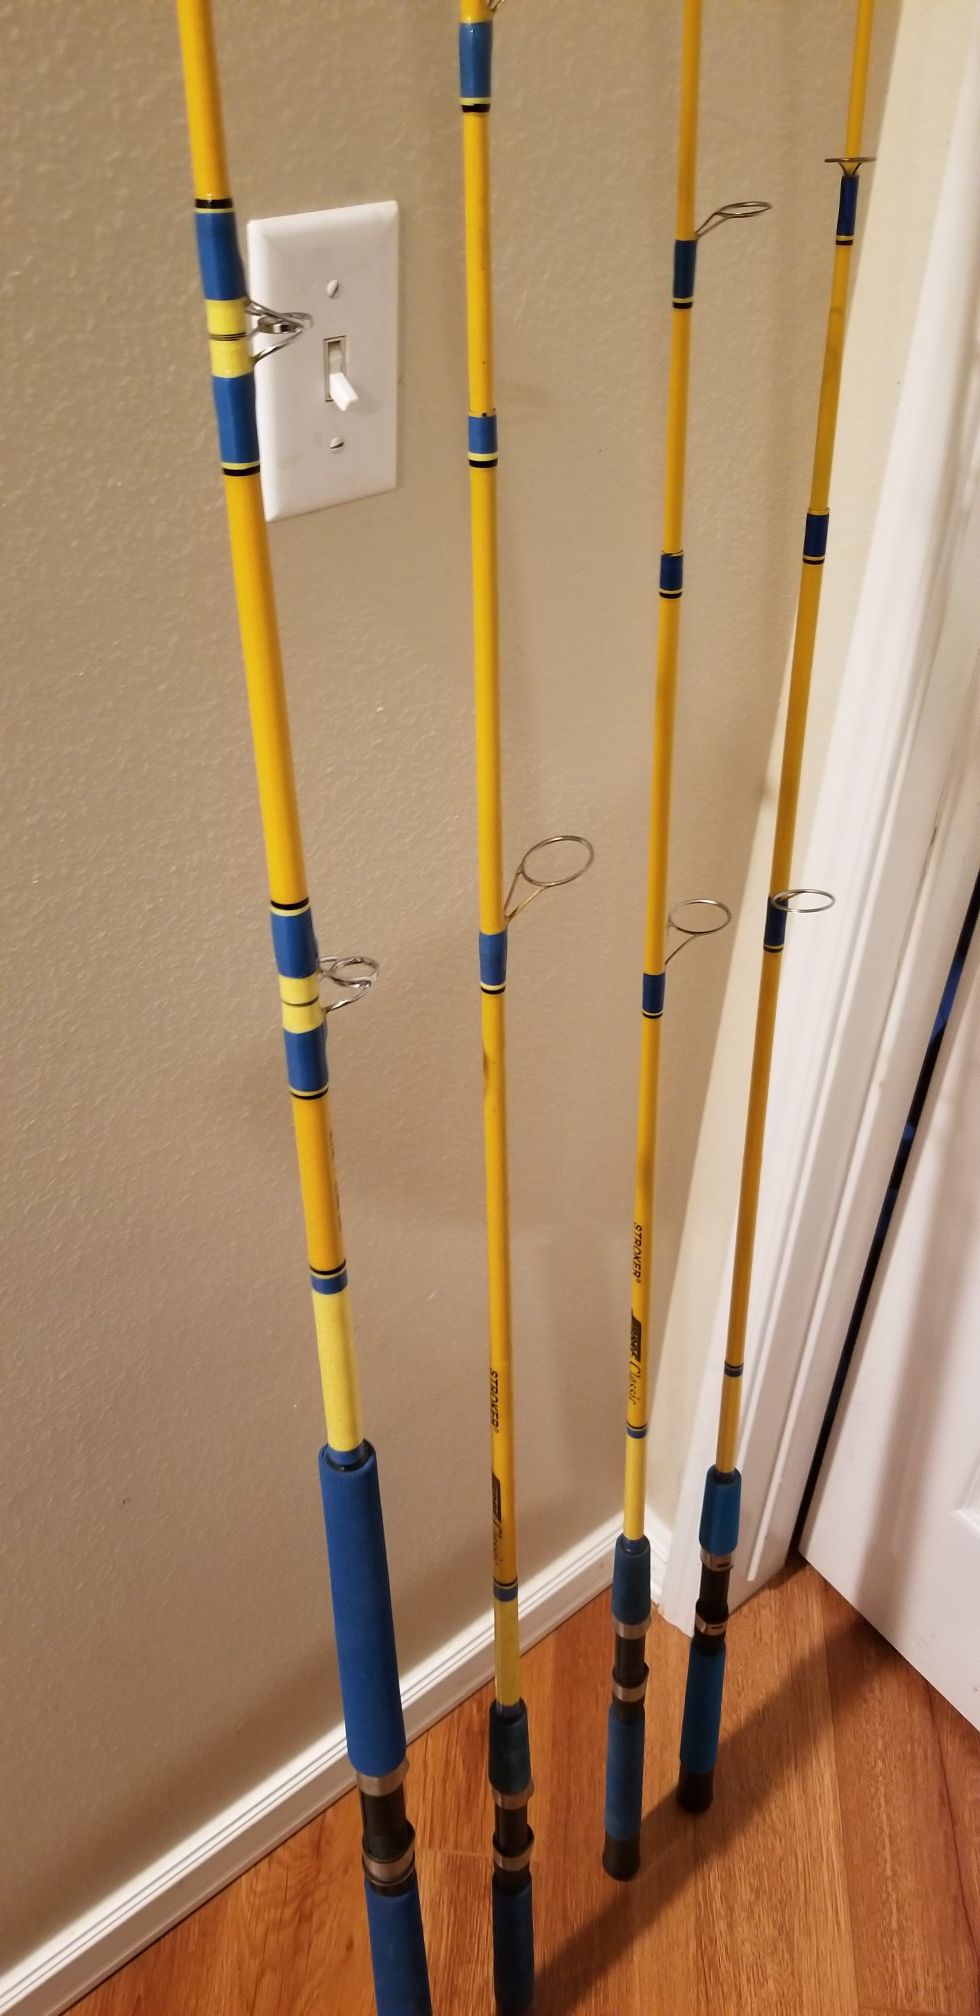 Sabre classic fishing rods